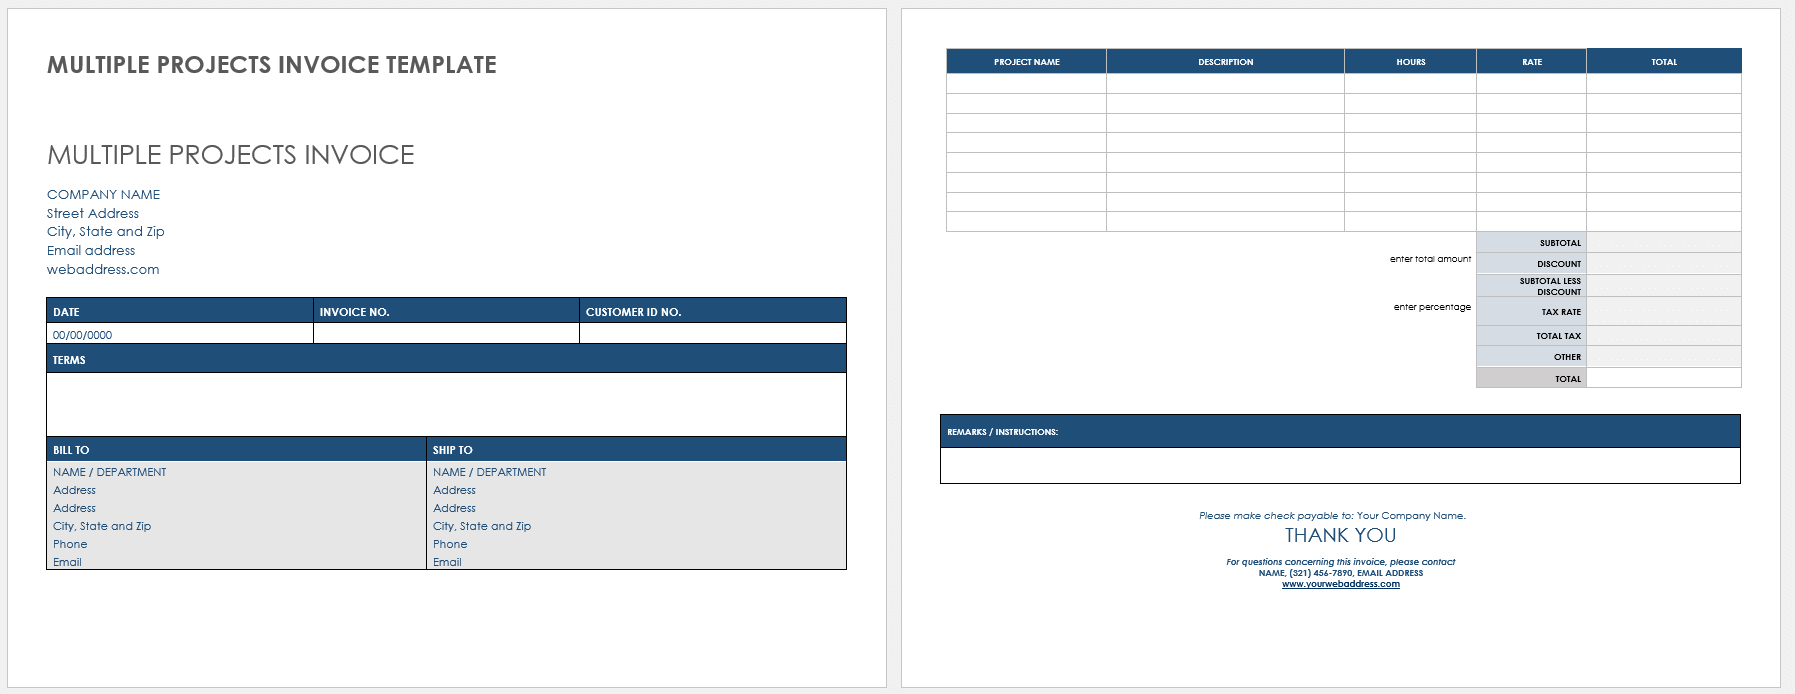 Multiple Projects Invoice Template